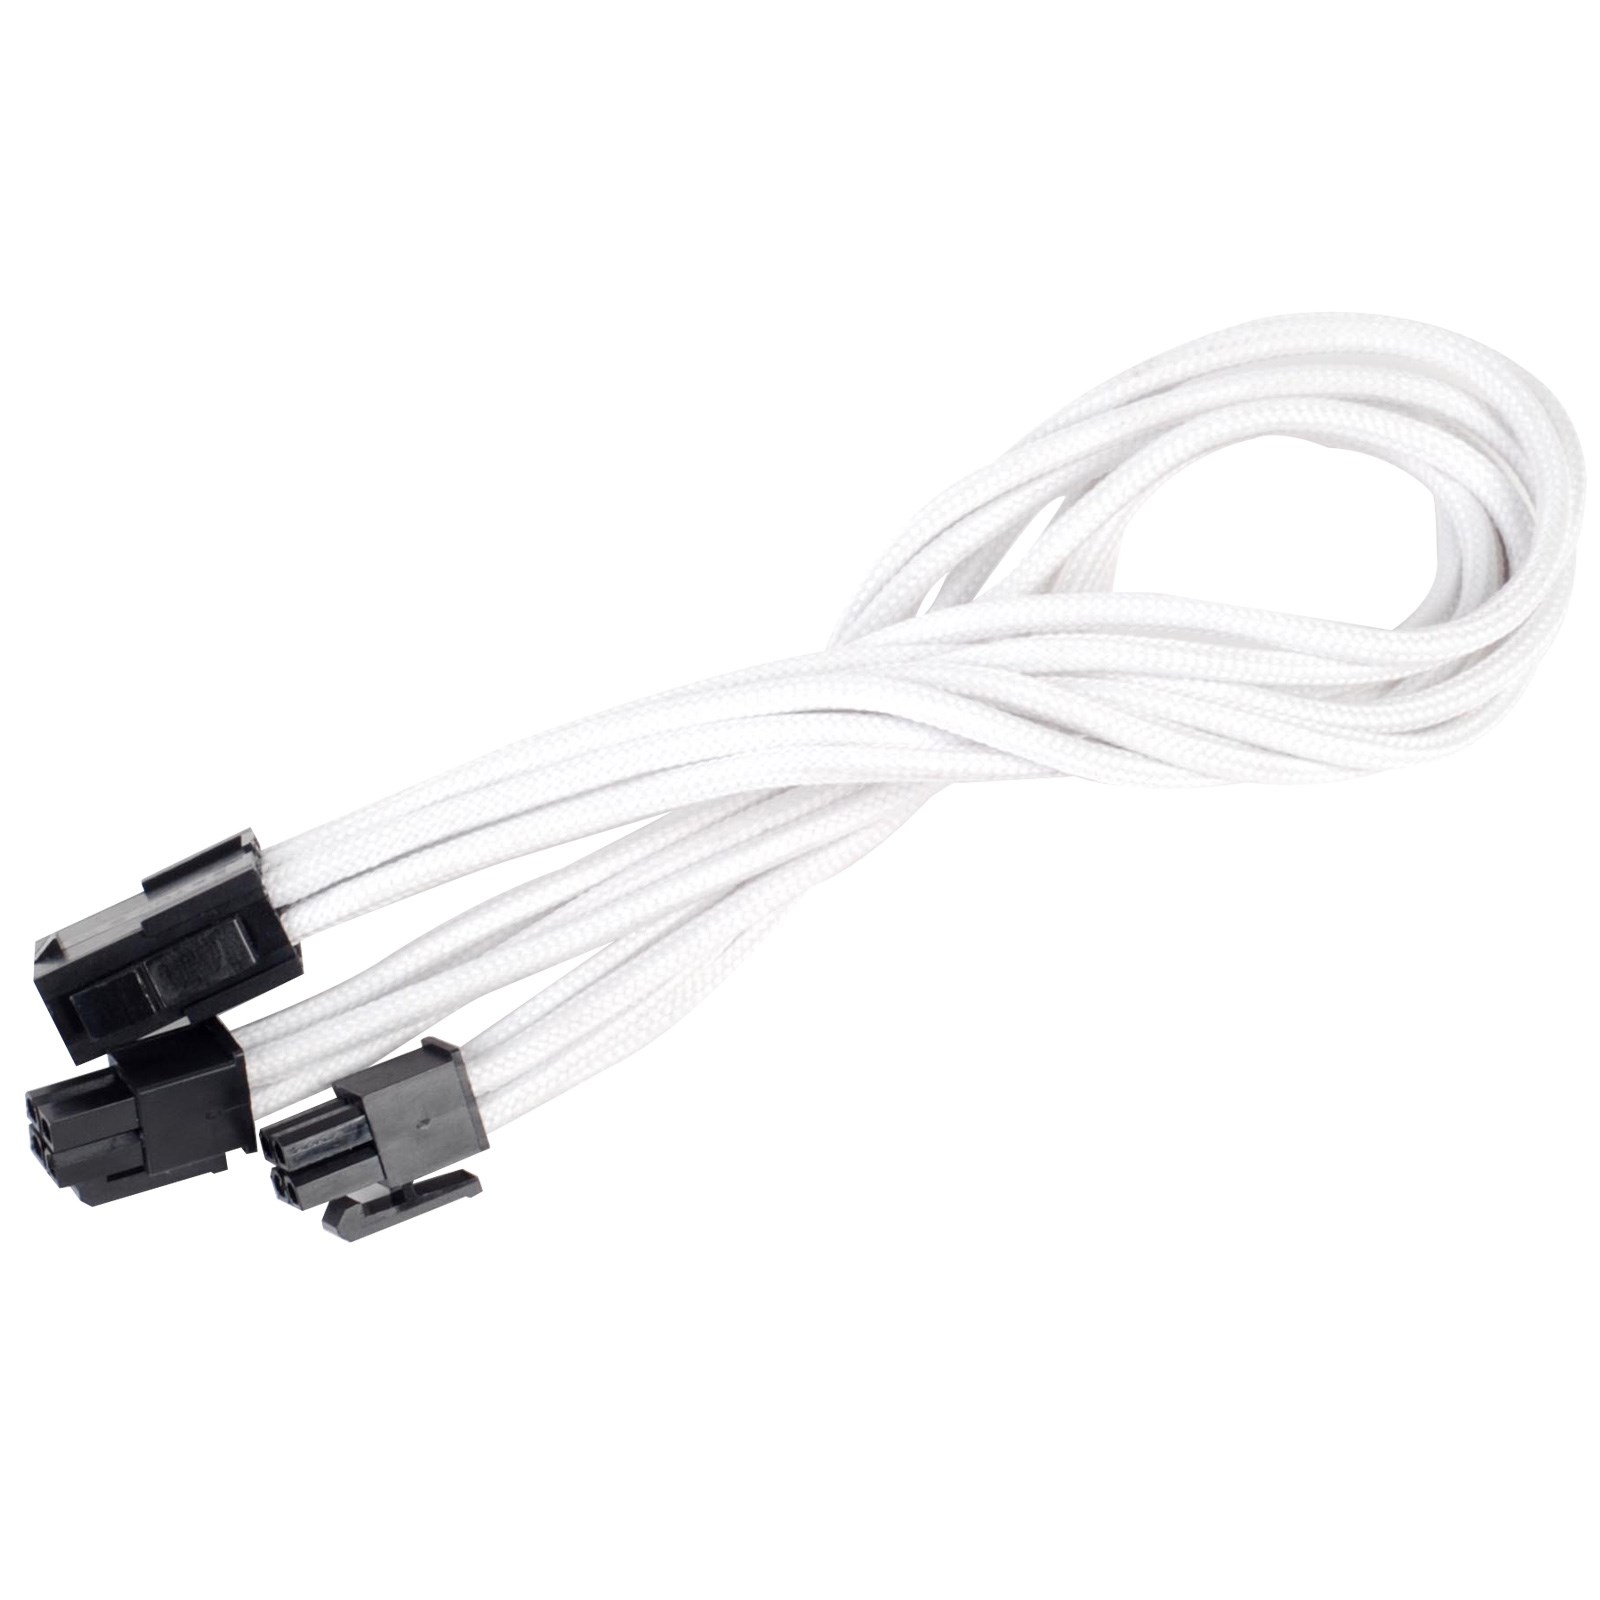 Photos - Cable (video, audio, USB) SilverStone PP07-EPS8W 8-pin EPS 300mm Extension Cable Sleeved in SST-PP07 